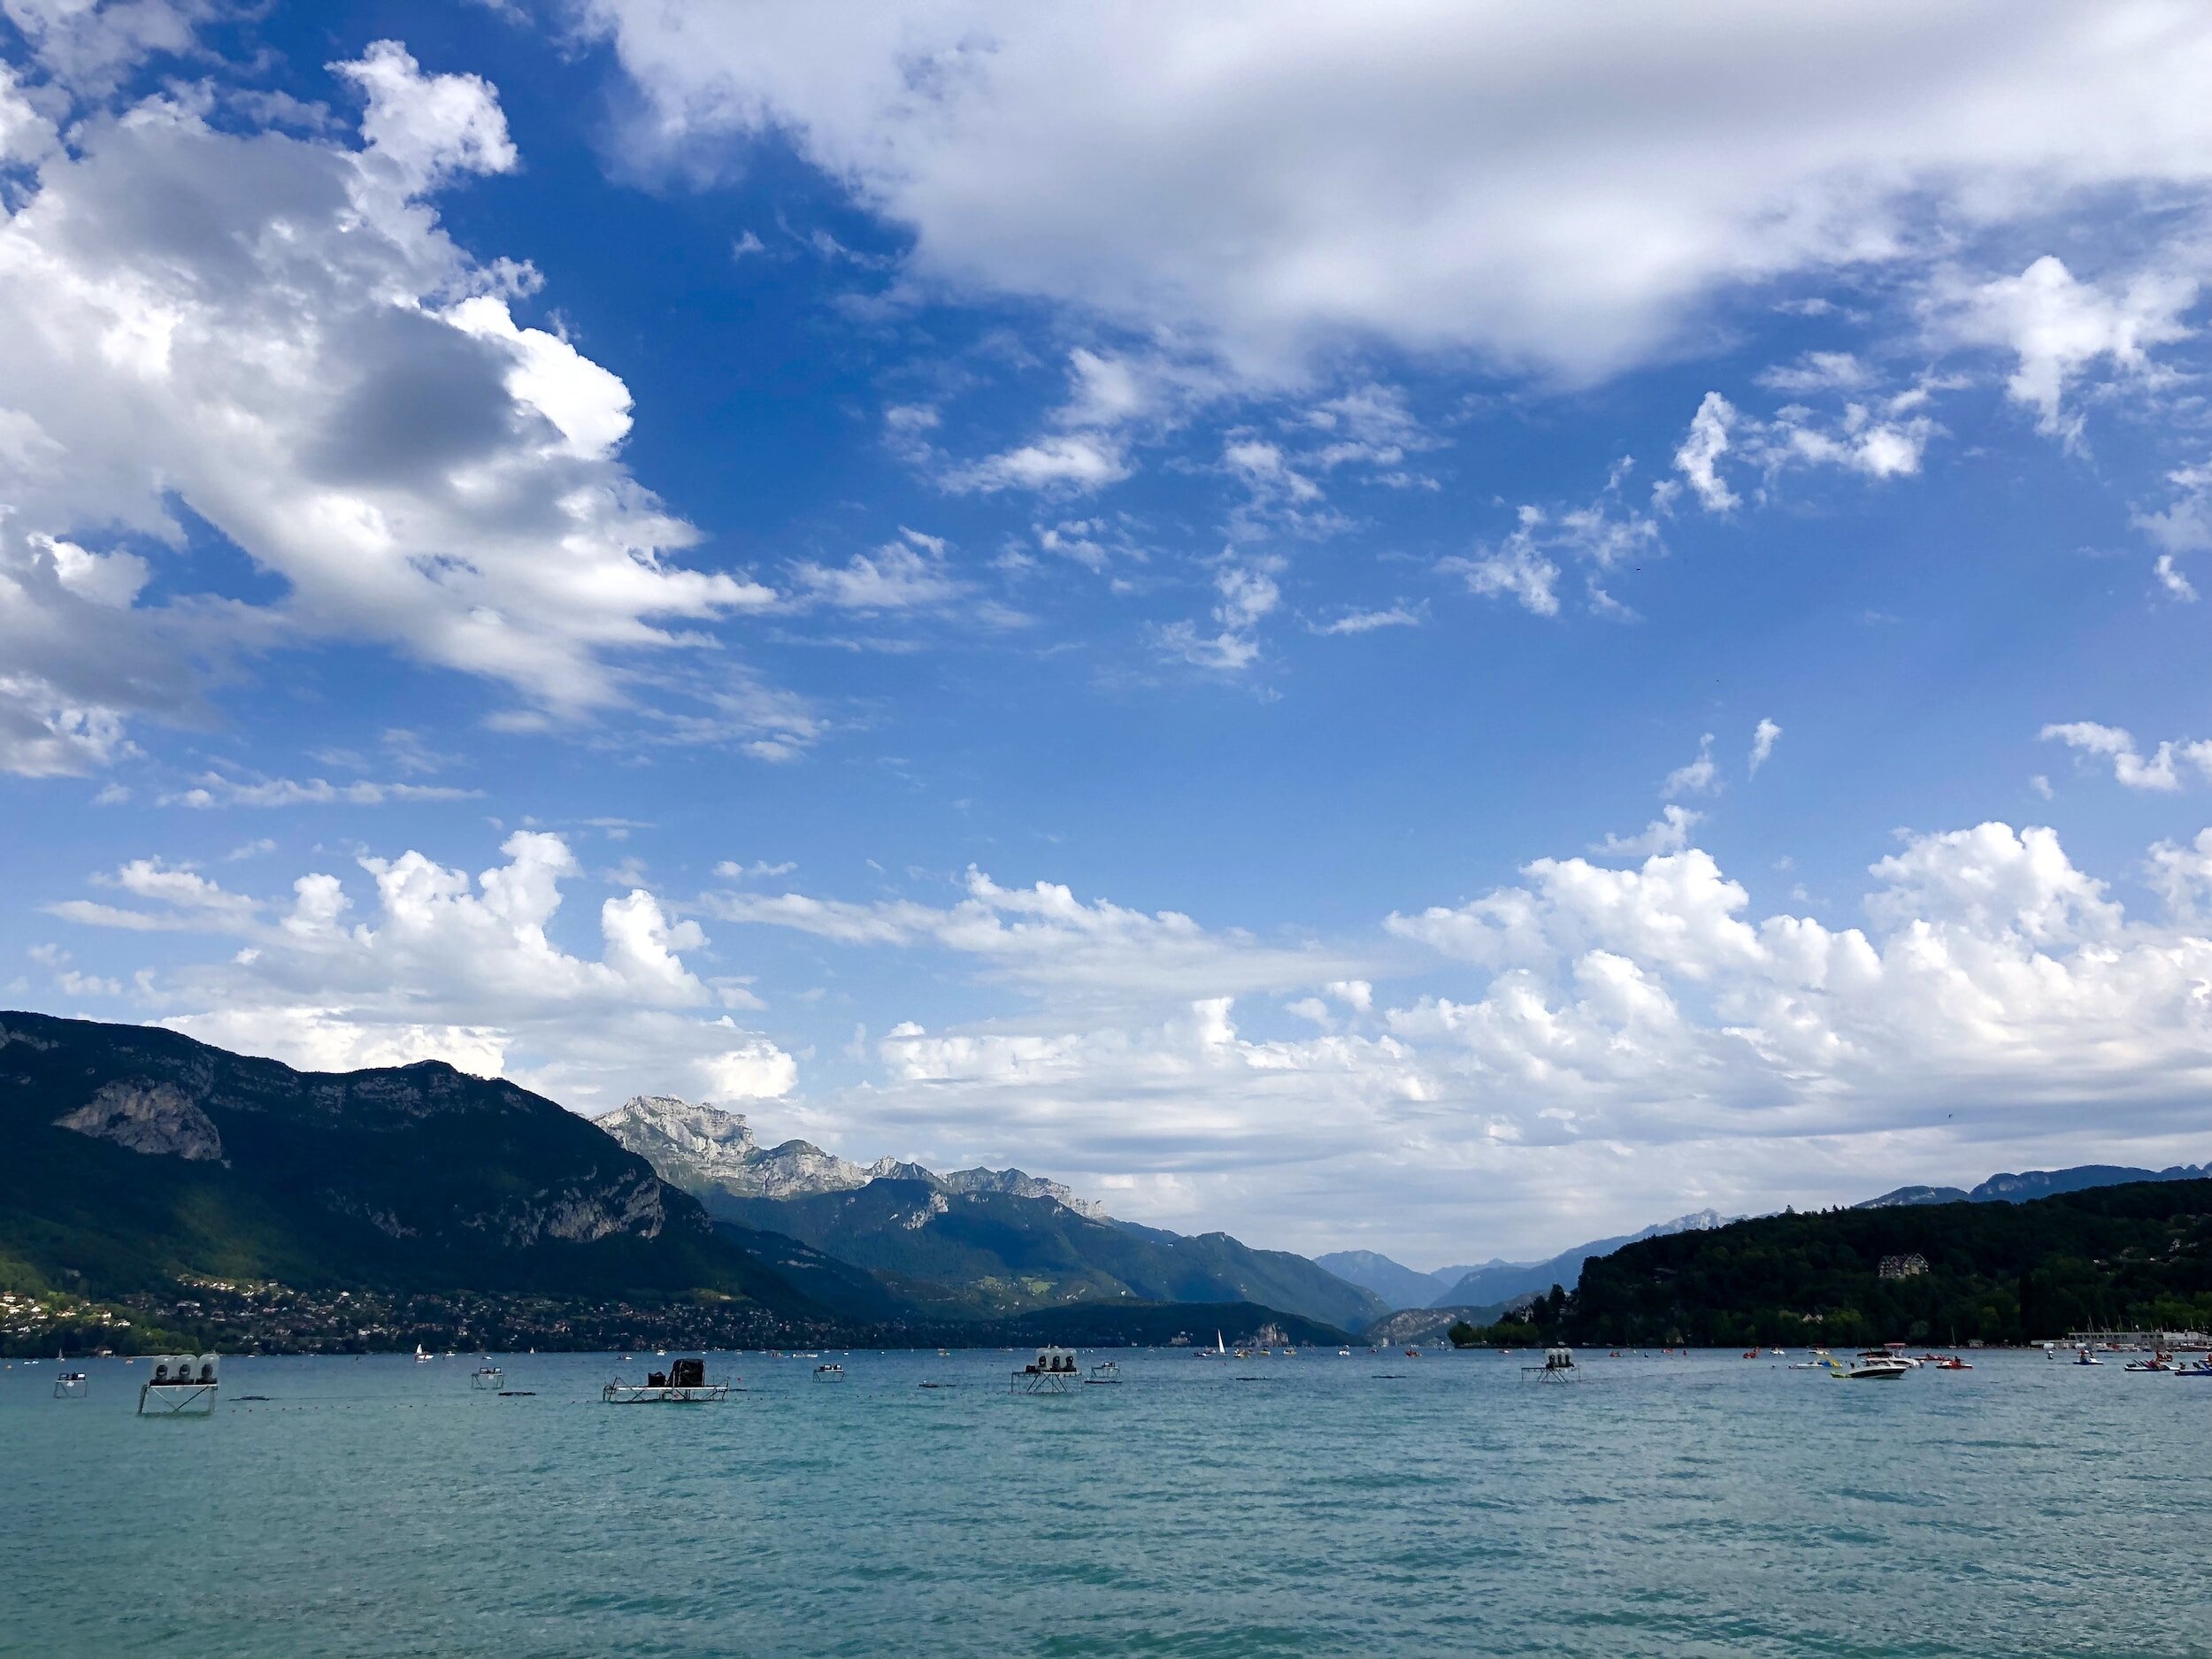 Discover La Clusaz and Lake Annecy in the heart of the Alps